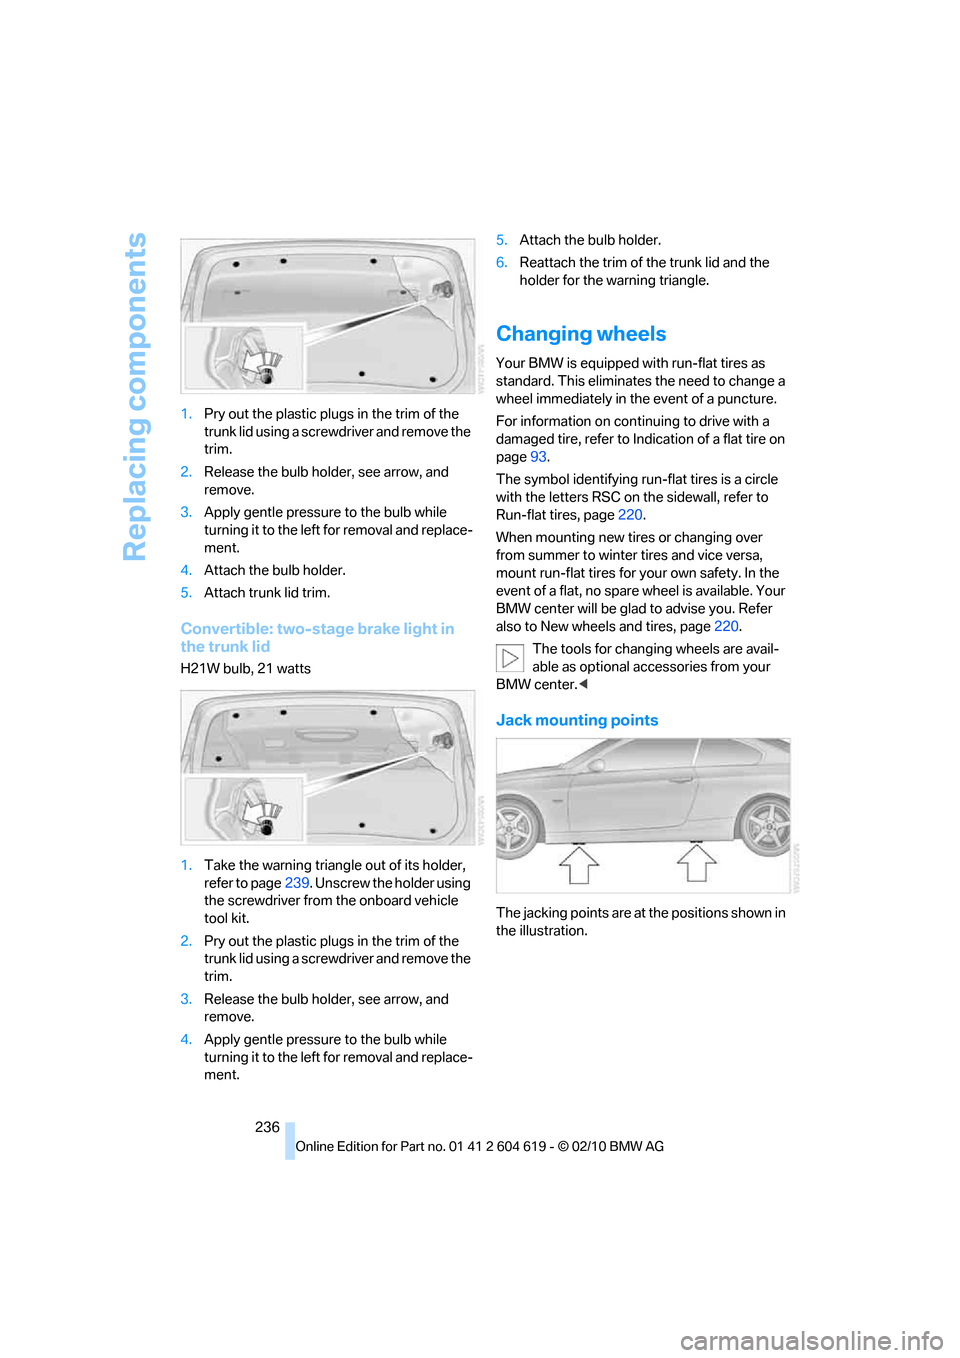 BMW 328I COUPE 2011 E93 Owners Manual Replacing components
236 1.Pry out the plastic plugs in the trim of the 
trunk lid using a screwdriver and remove the 
trim.
2.Release the bulb holder, see arrow, and 
remove.
3.Apply gentle pressure 